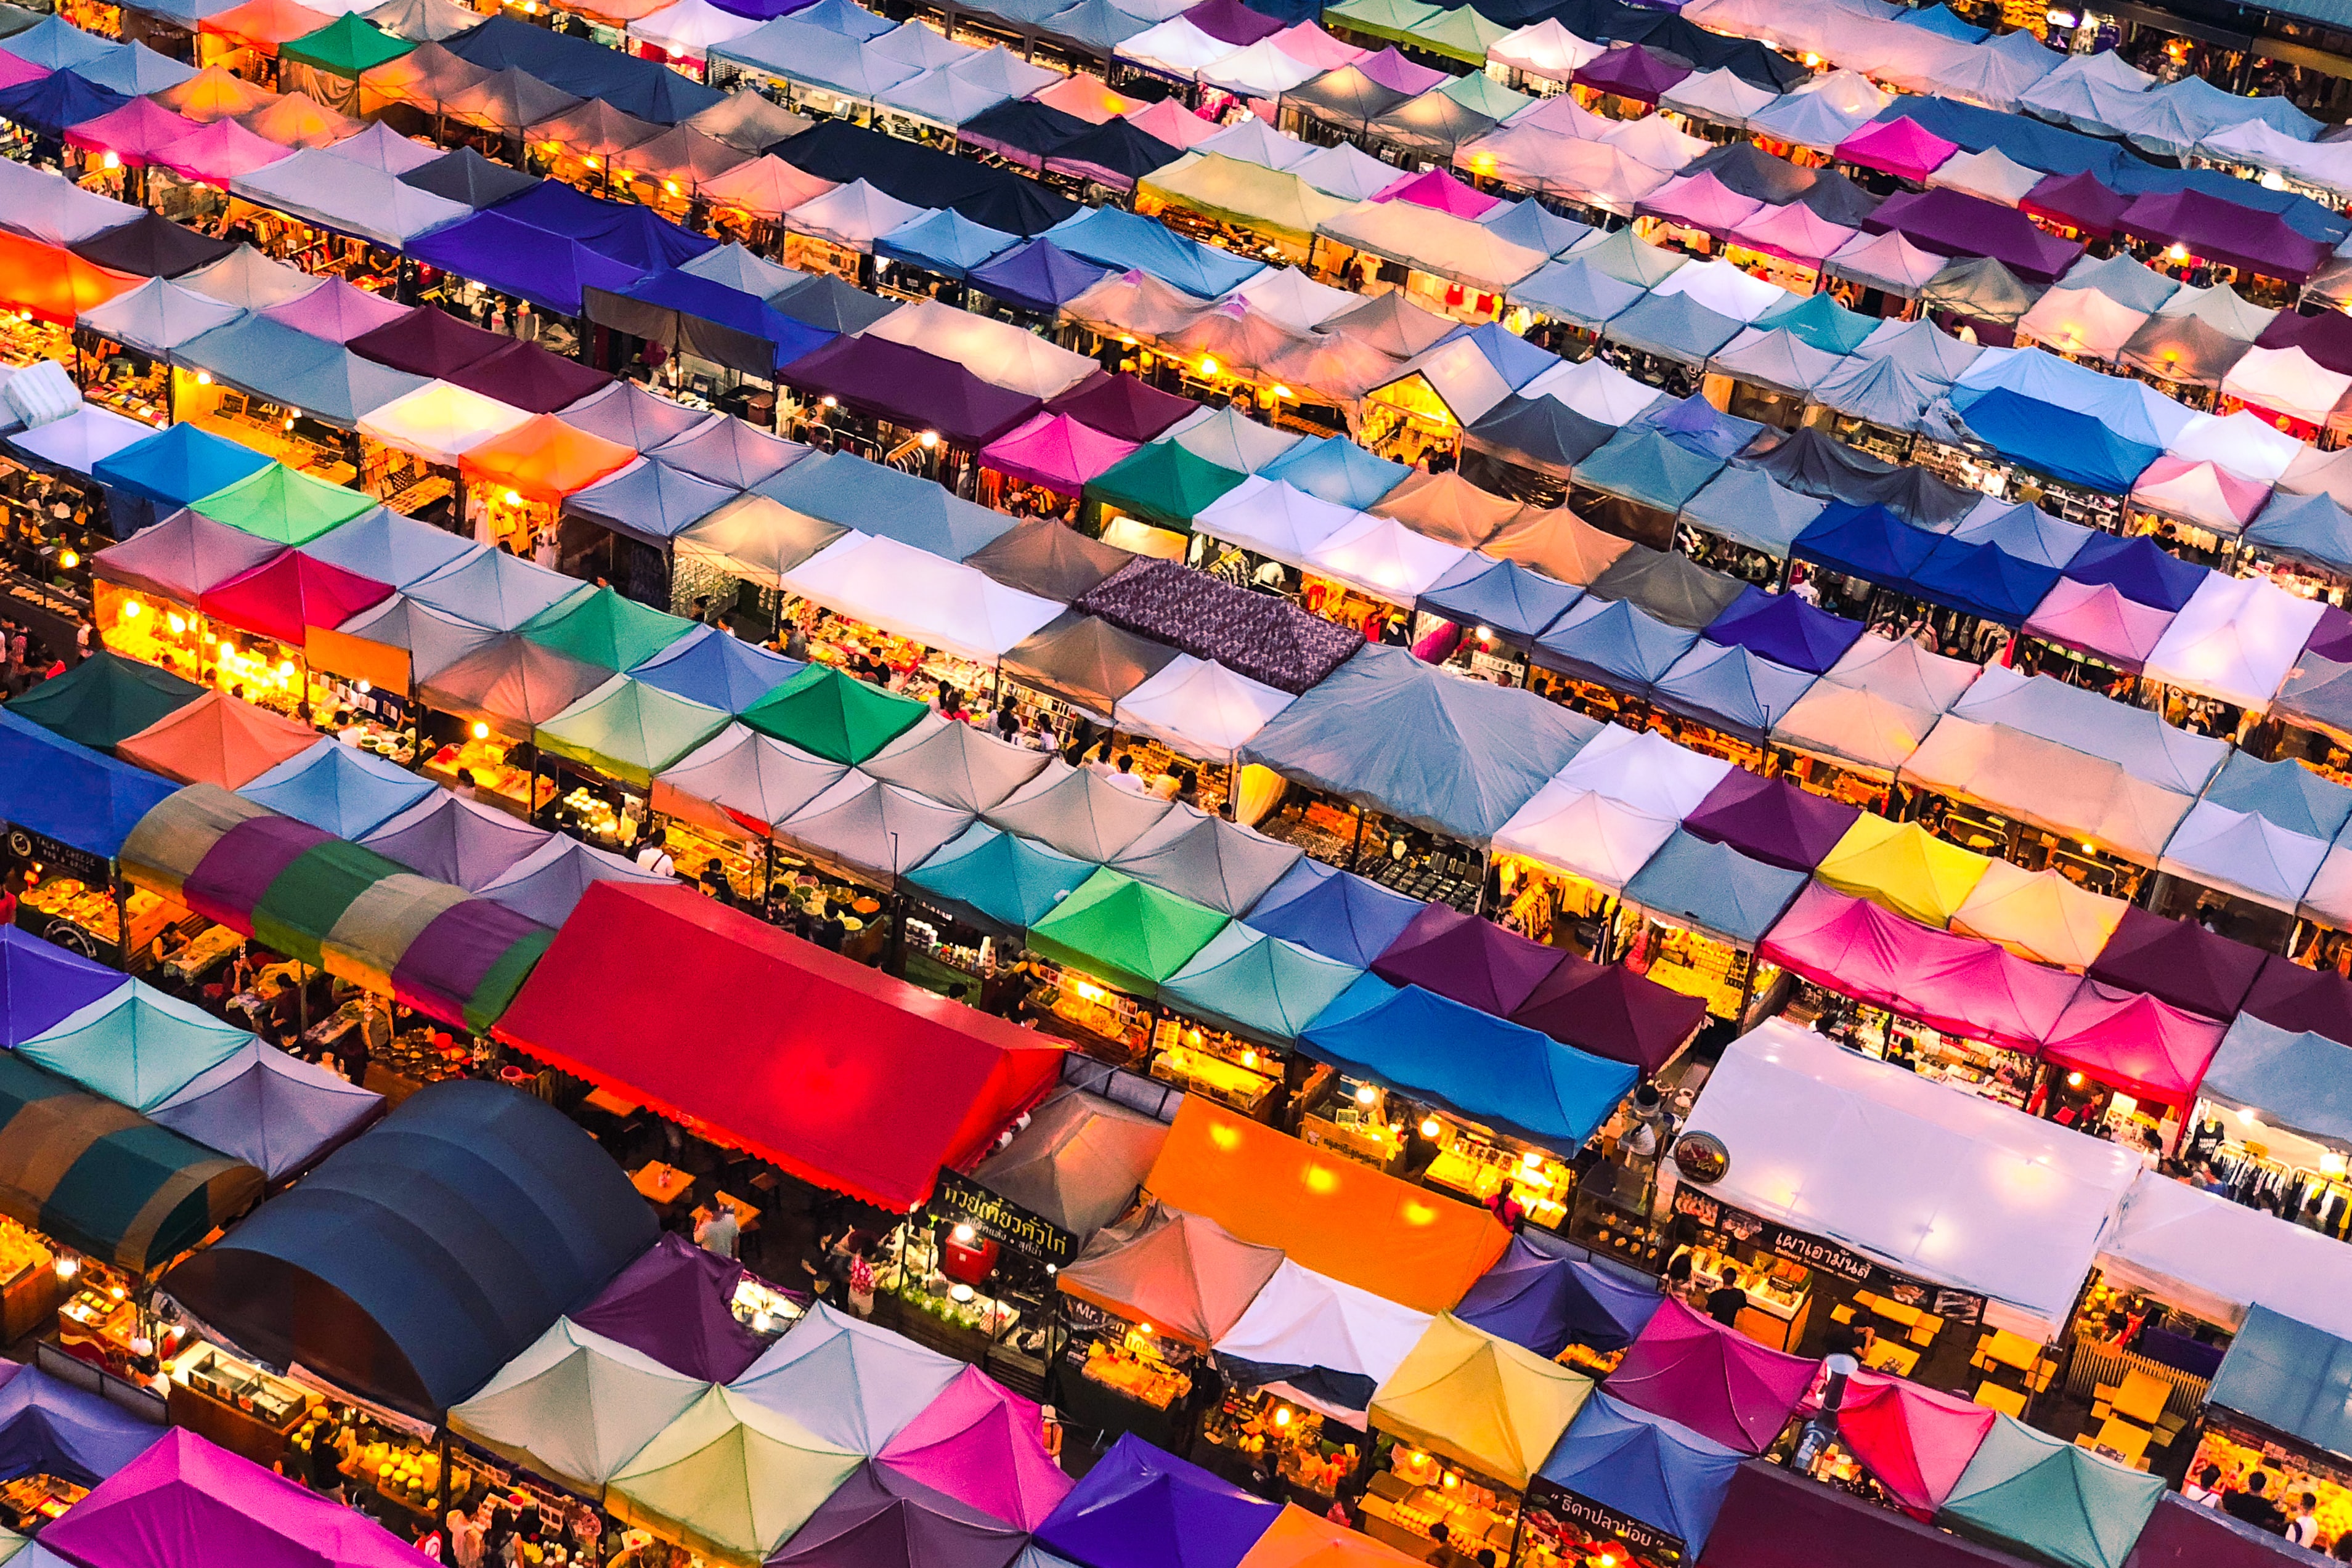 A drone view of rows and rows of marketplace stalls at dusk